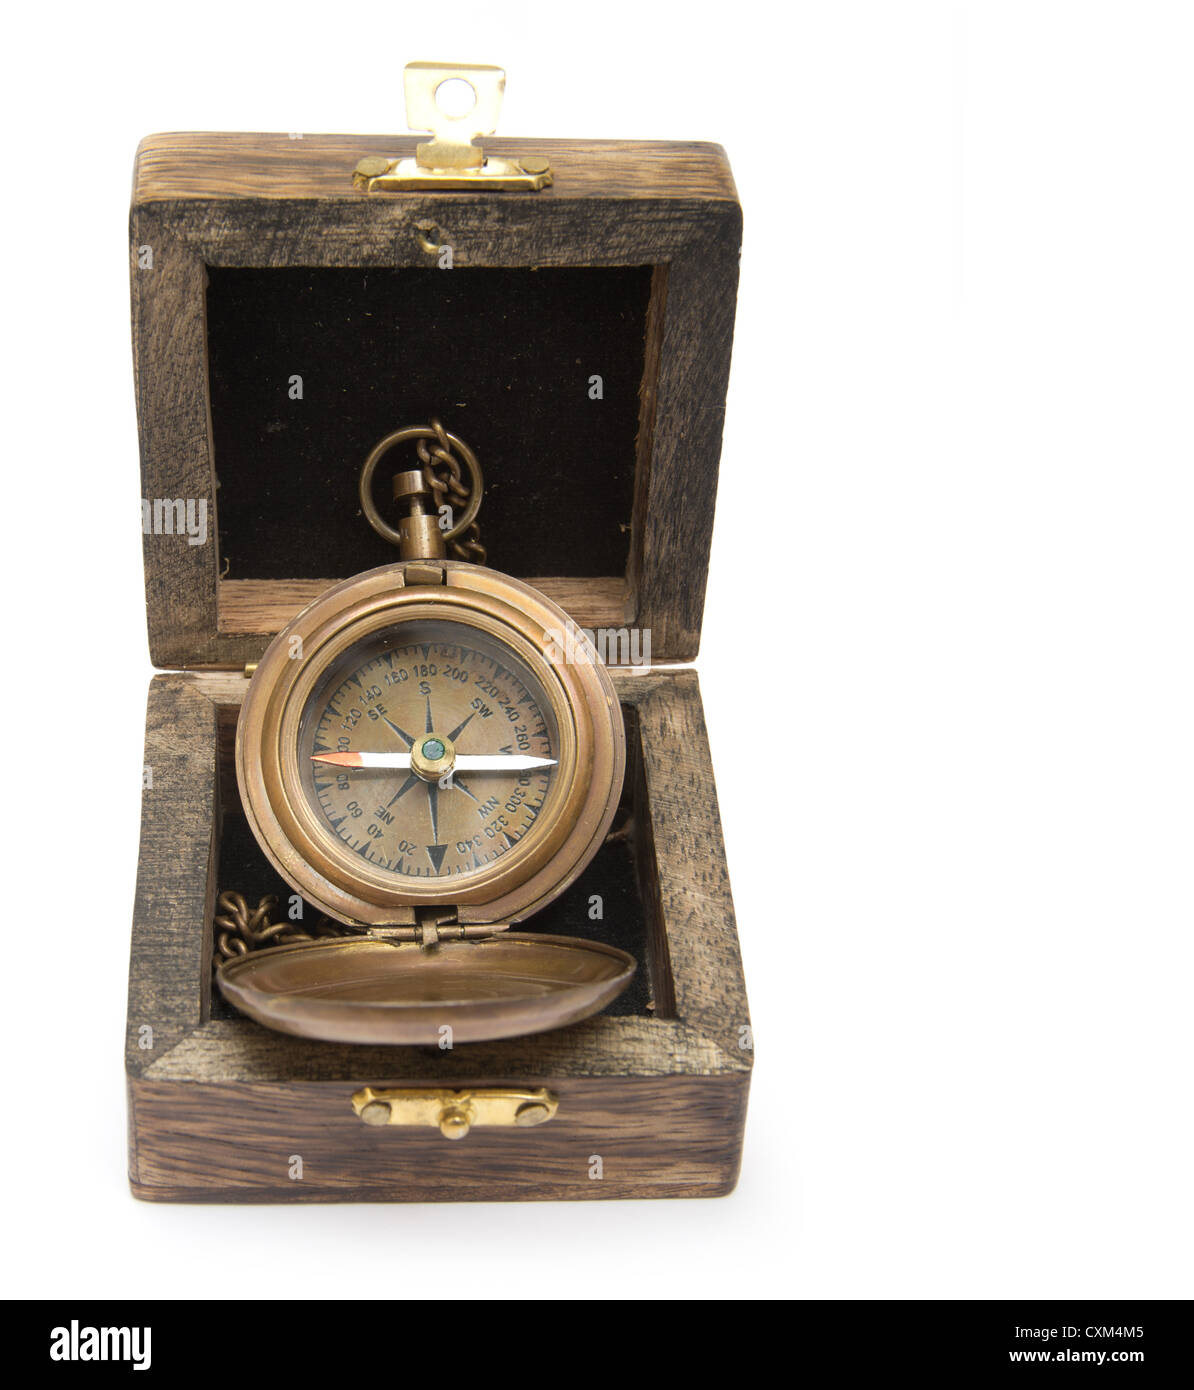 Antique brass compass stock image. Image of isolated, north - 1624275